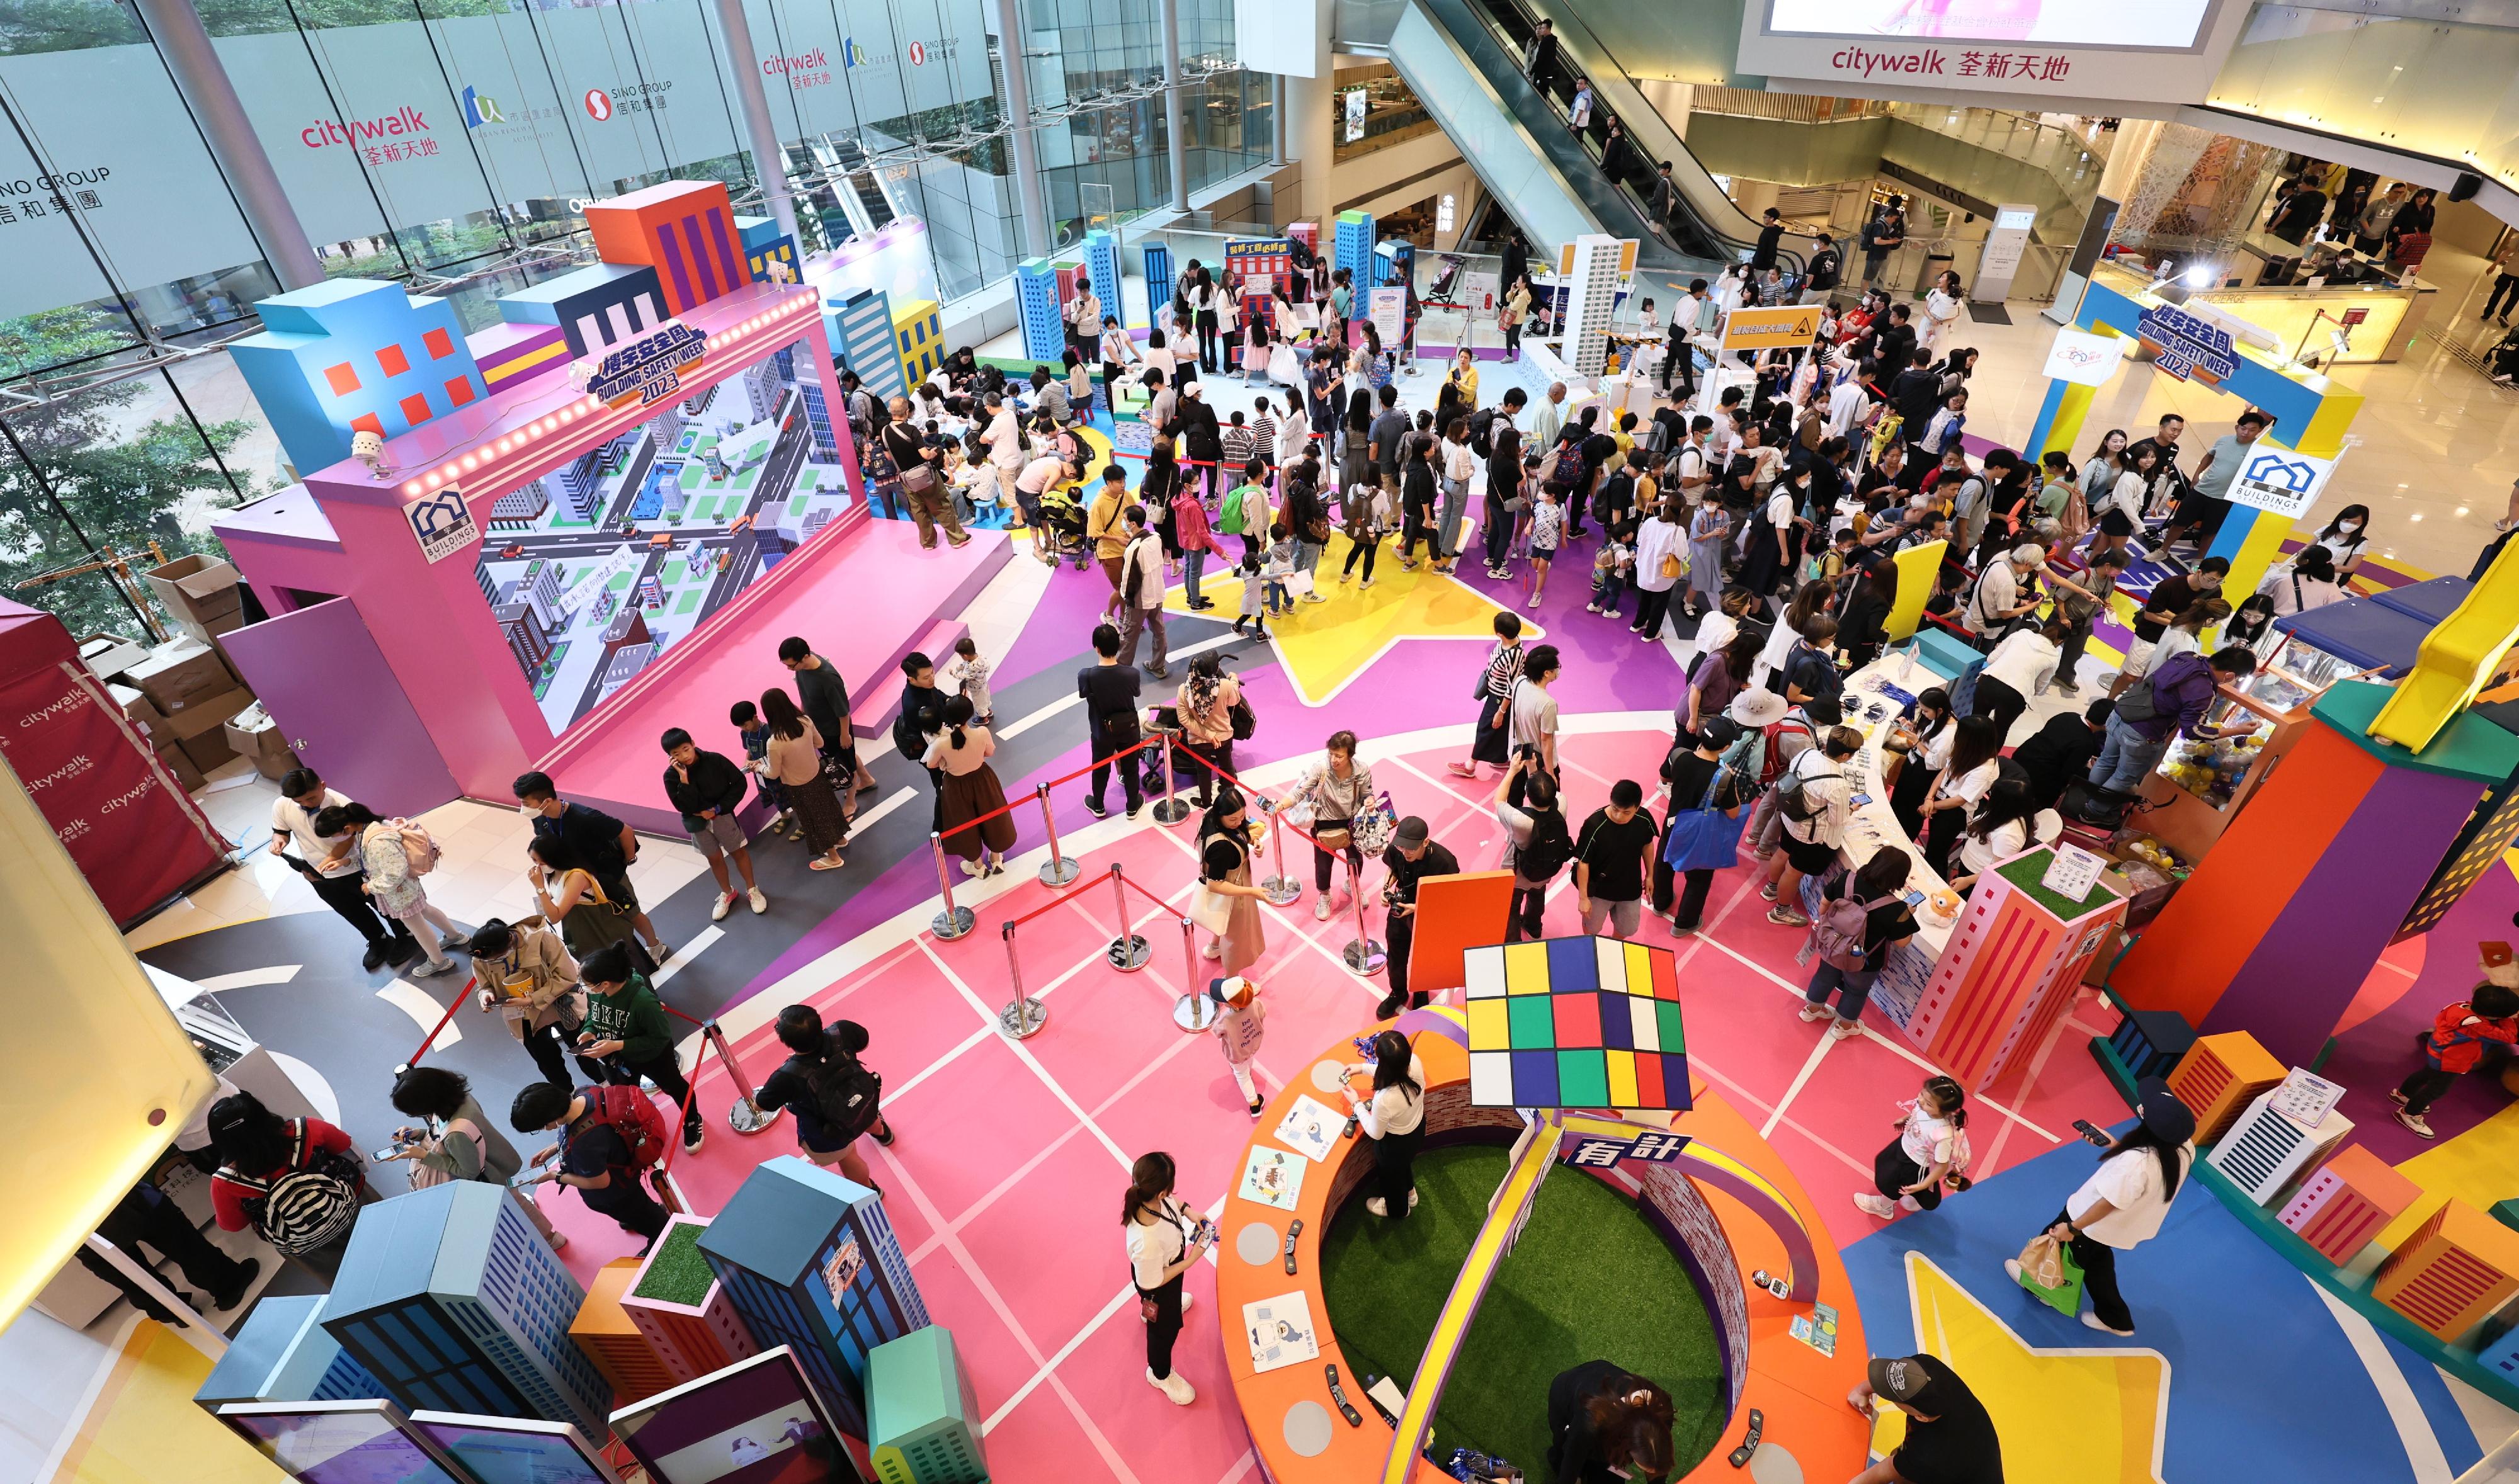 The Buildings Department launched Building Safety Week 2023 today (October 21). Photo shows the Building Safety Carnival at Citywalk in Tsuen Wan.